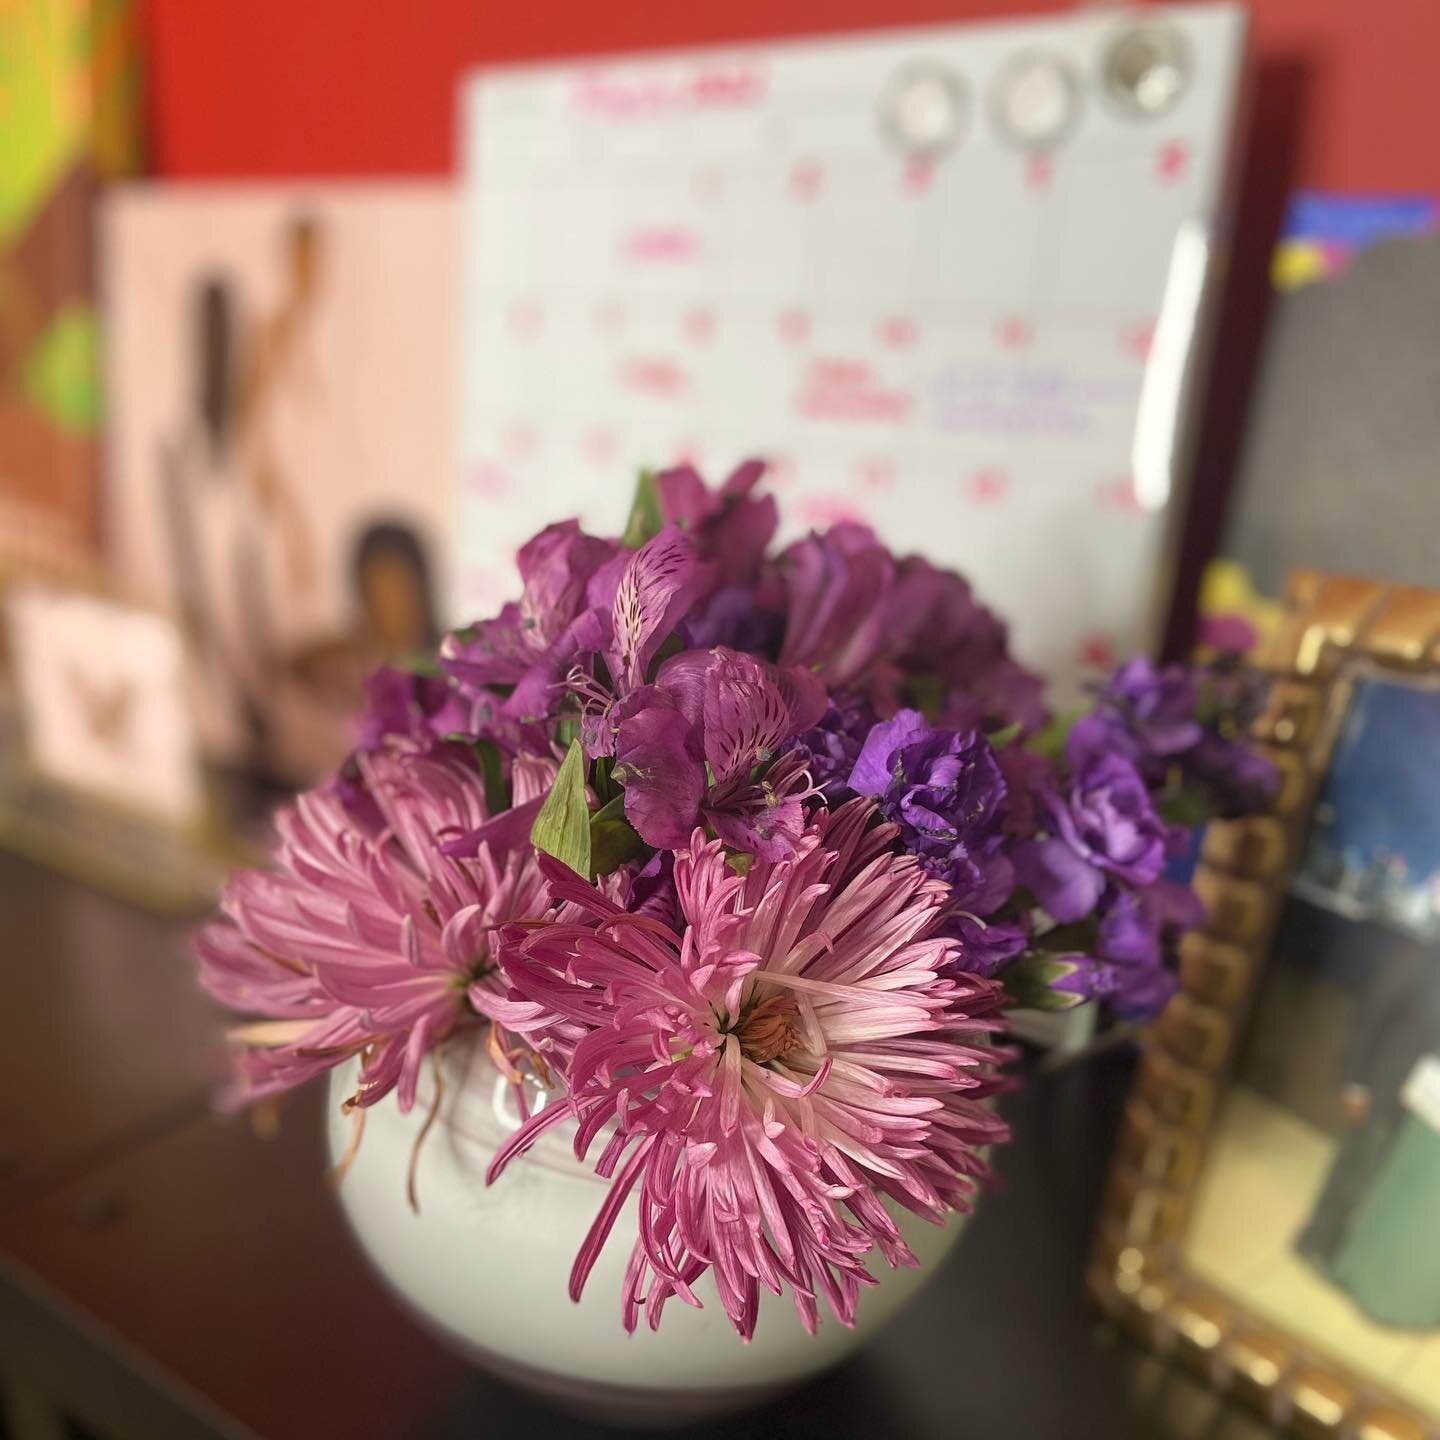 These beauties lasted two whole weeks and they still have life in them. My flowers are teaching me that optimal conditions will allow you to thrive beyond other people&rsquo;s expectations. Preach, Donna. I think I will. #reverenddonnao #sacredinvita